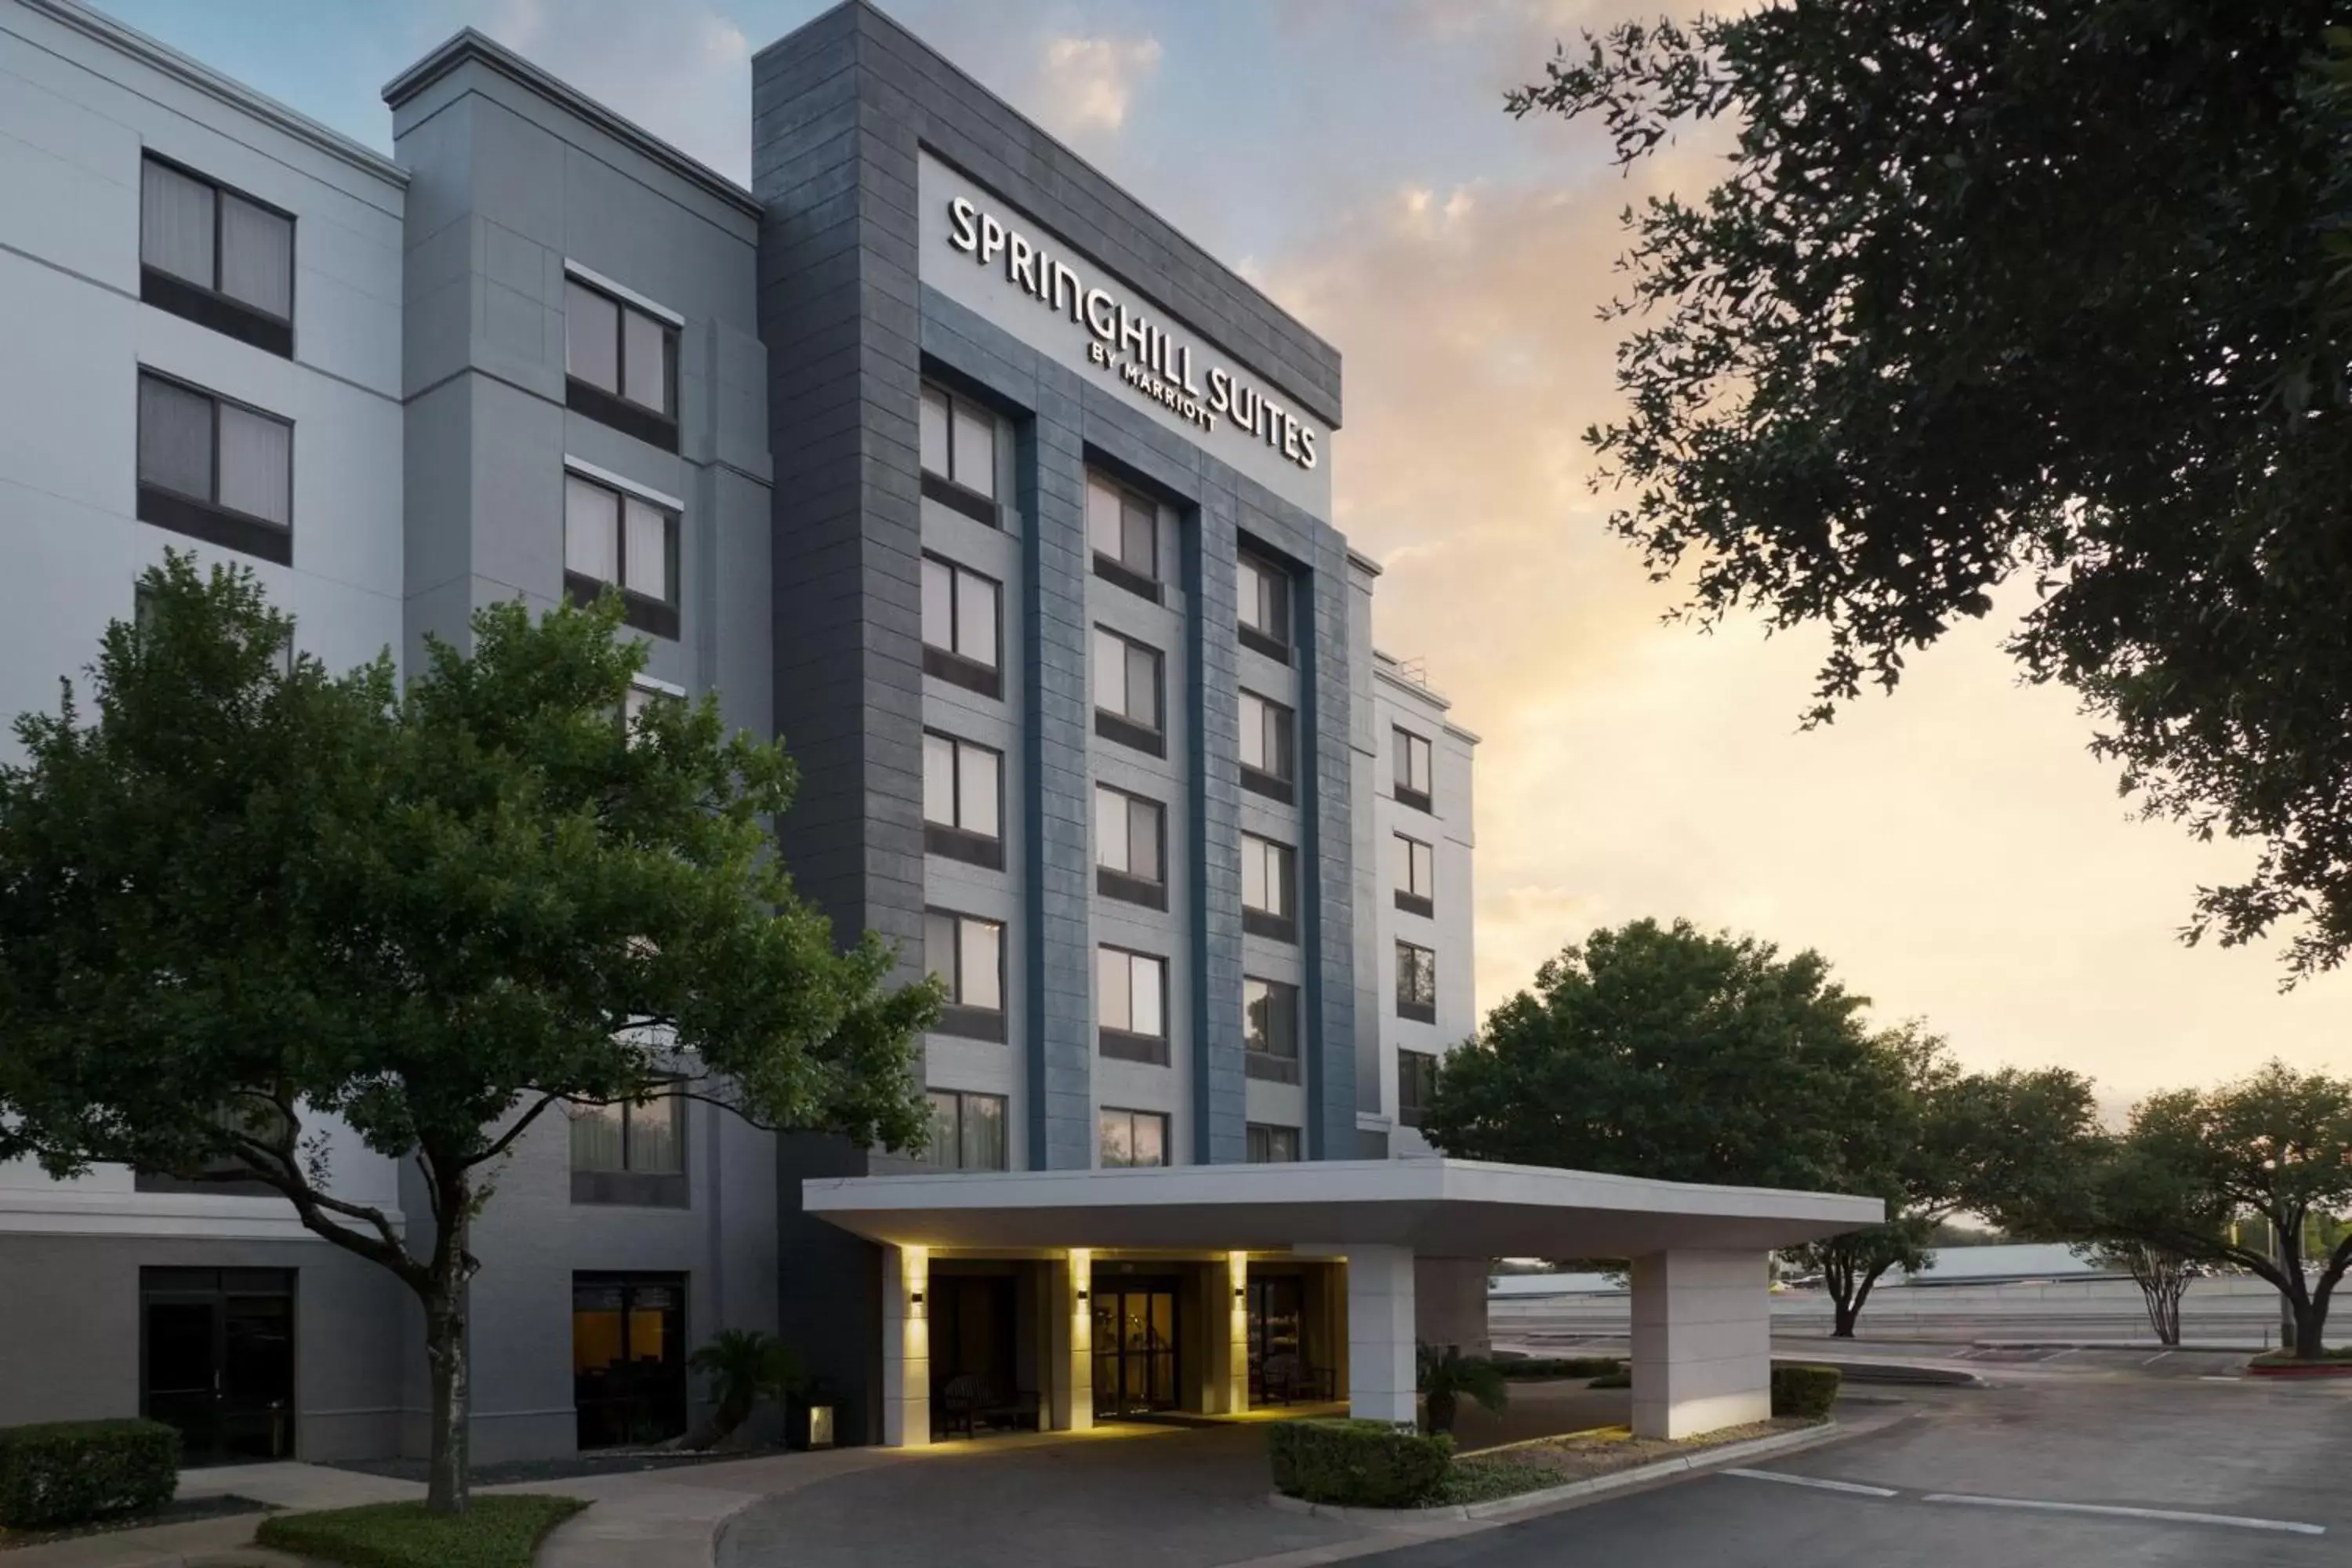 Property Building in SpringHill Suites Austin South